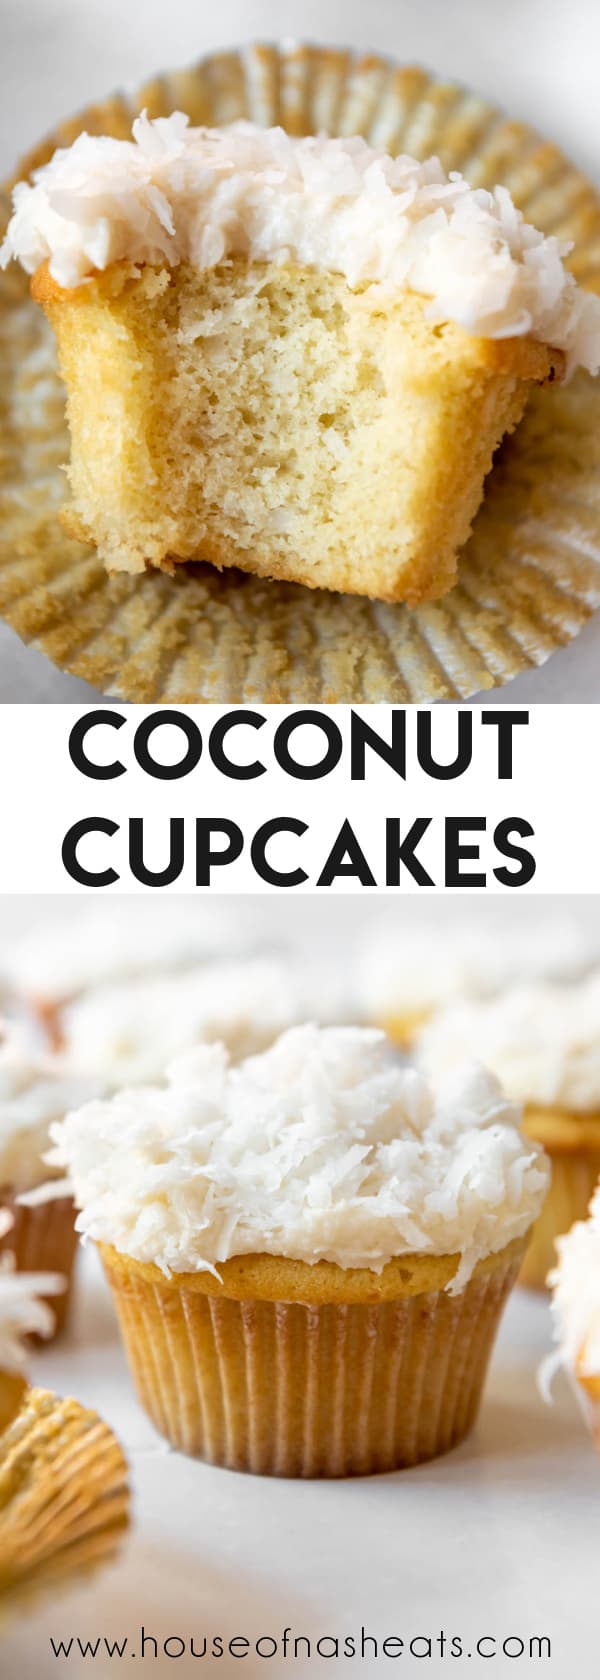 A collage of images of homemade coconut cupcakes with text overlay.